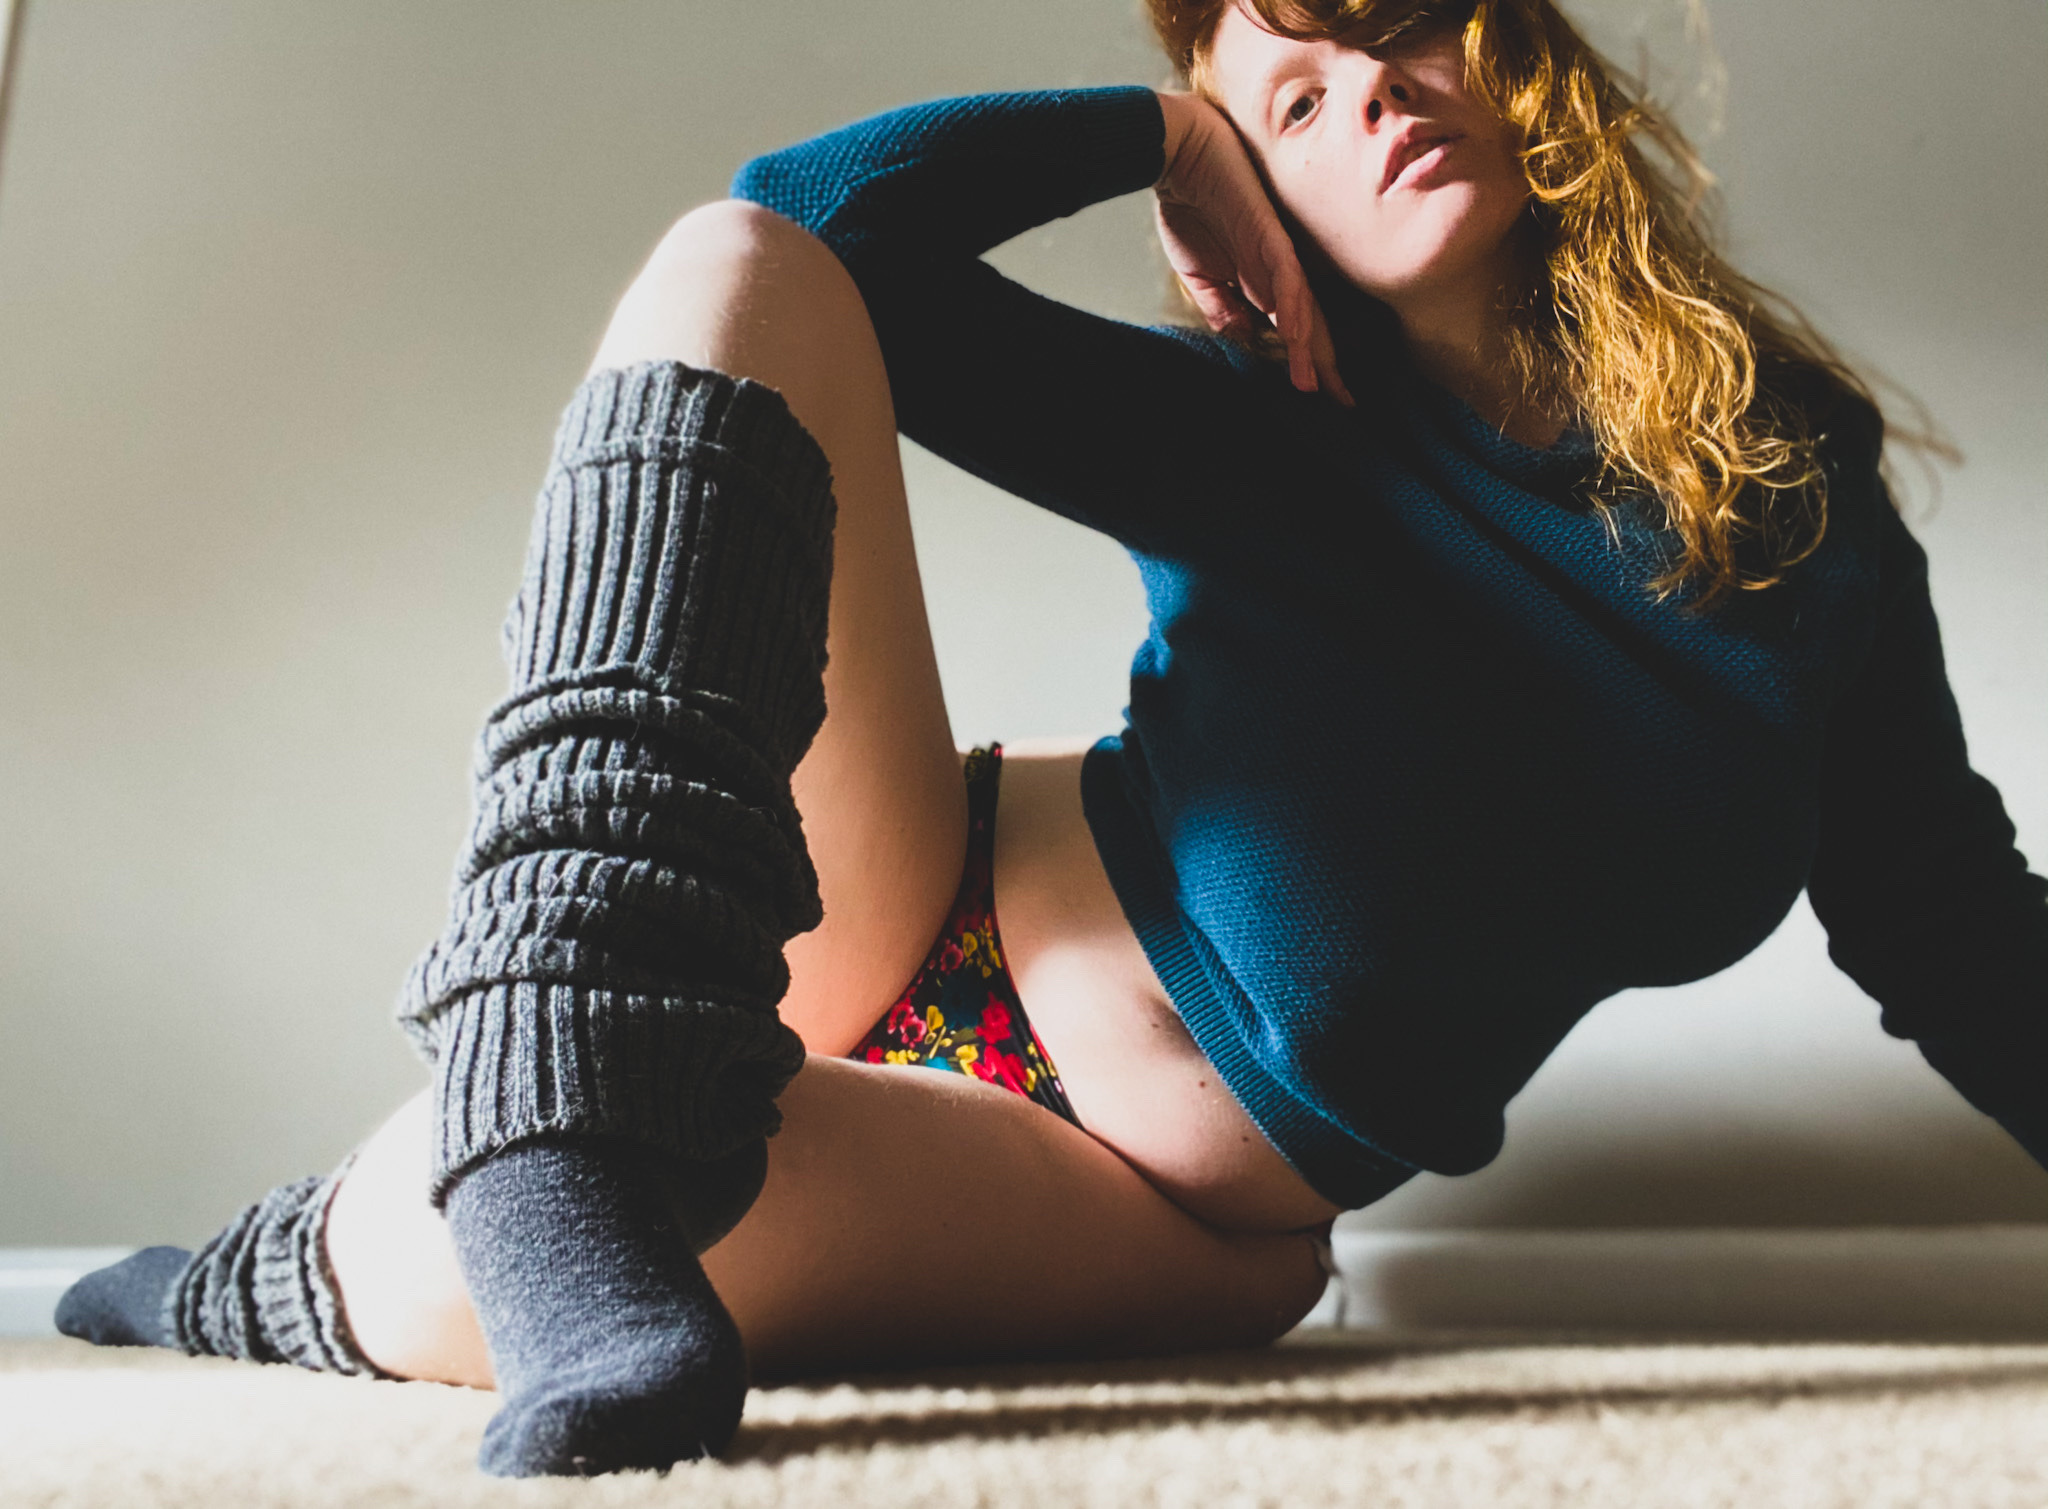 Sex ivie-walker:I found my old leg warmers from pictures